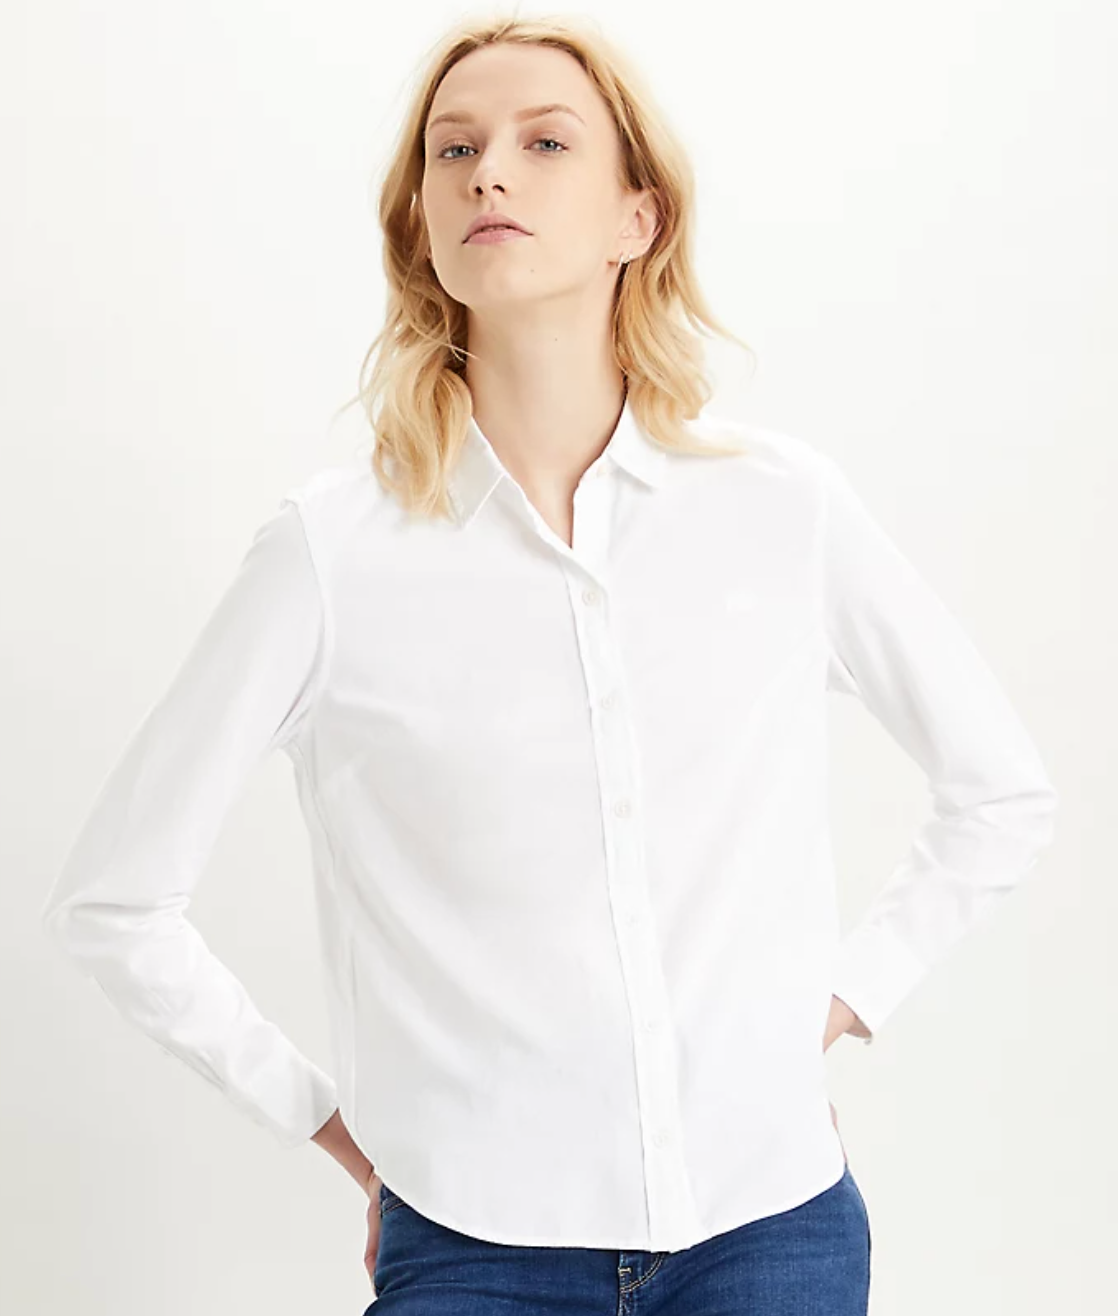 a person wearing a long sleeved white button up shirt